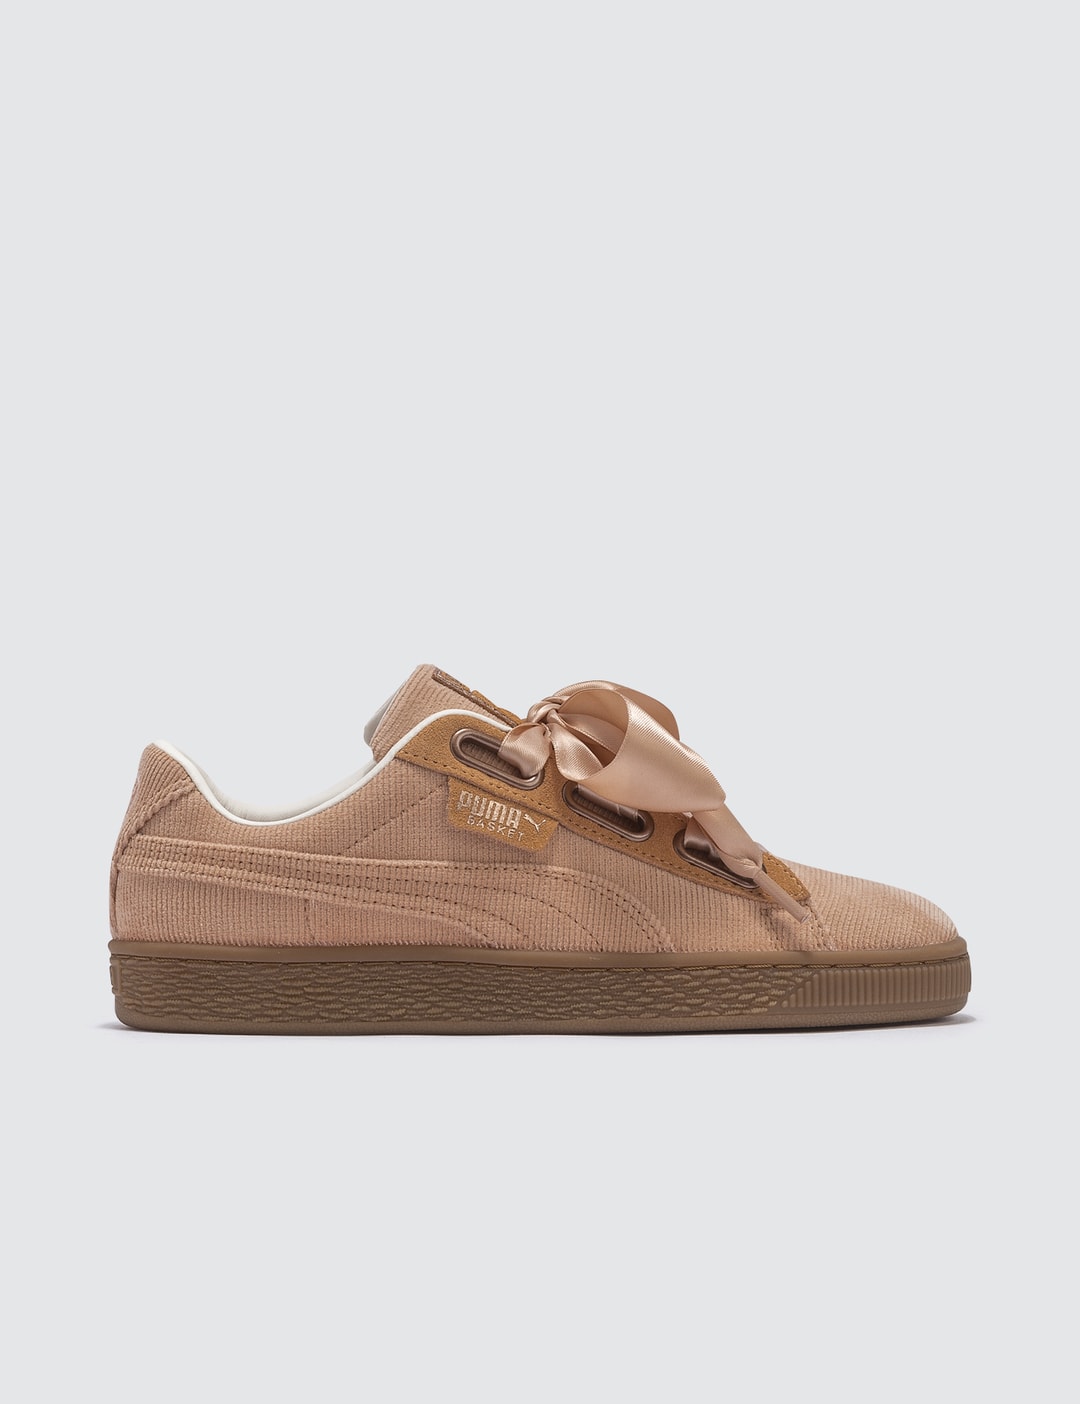 Puma - Basket Corduroy Wn's | HBX - Globally Curated and Lifestyle by Hypebeast